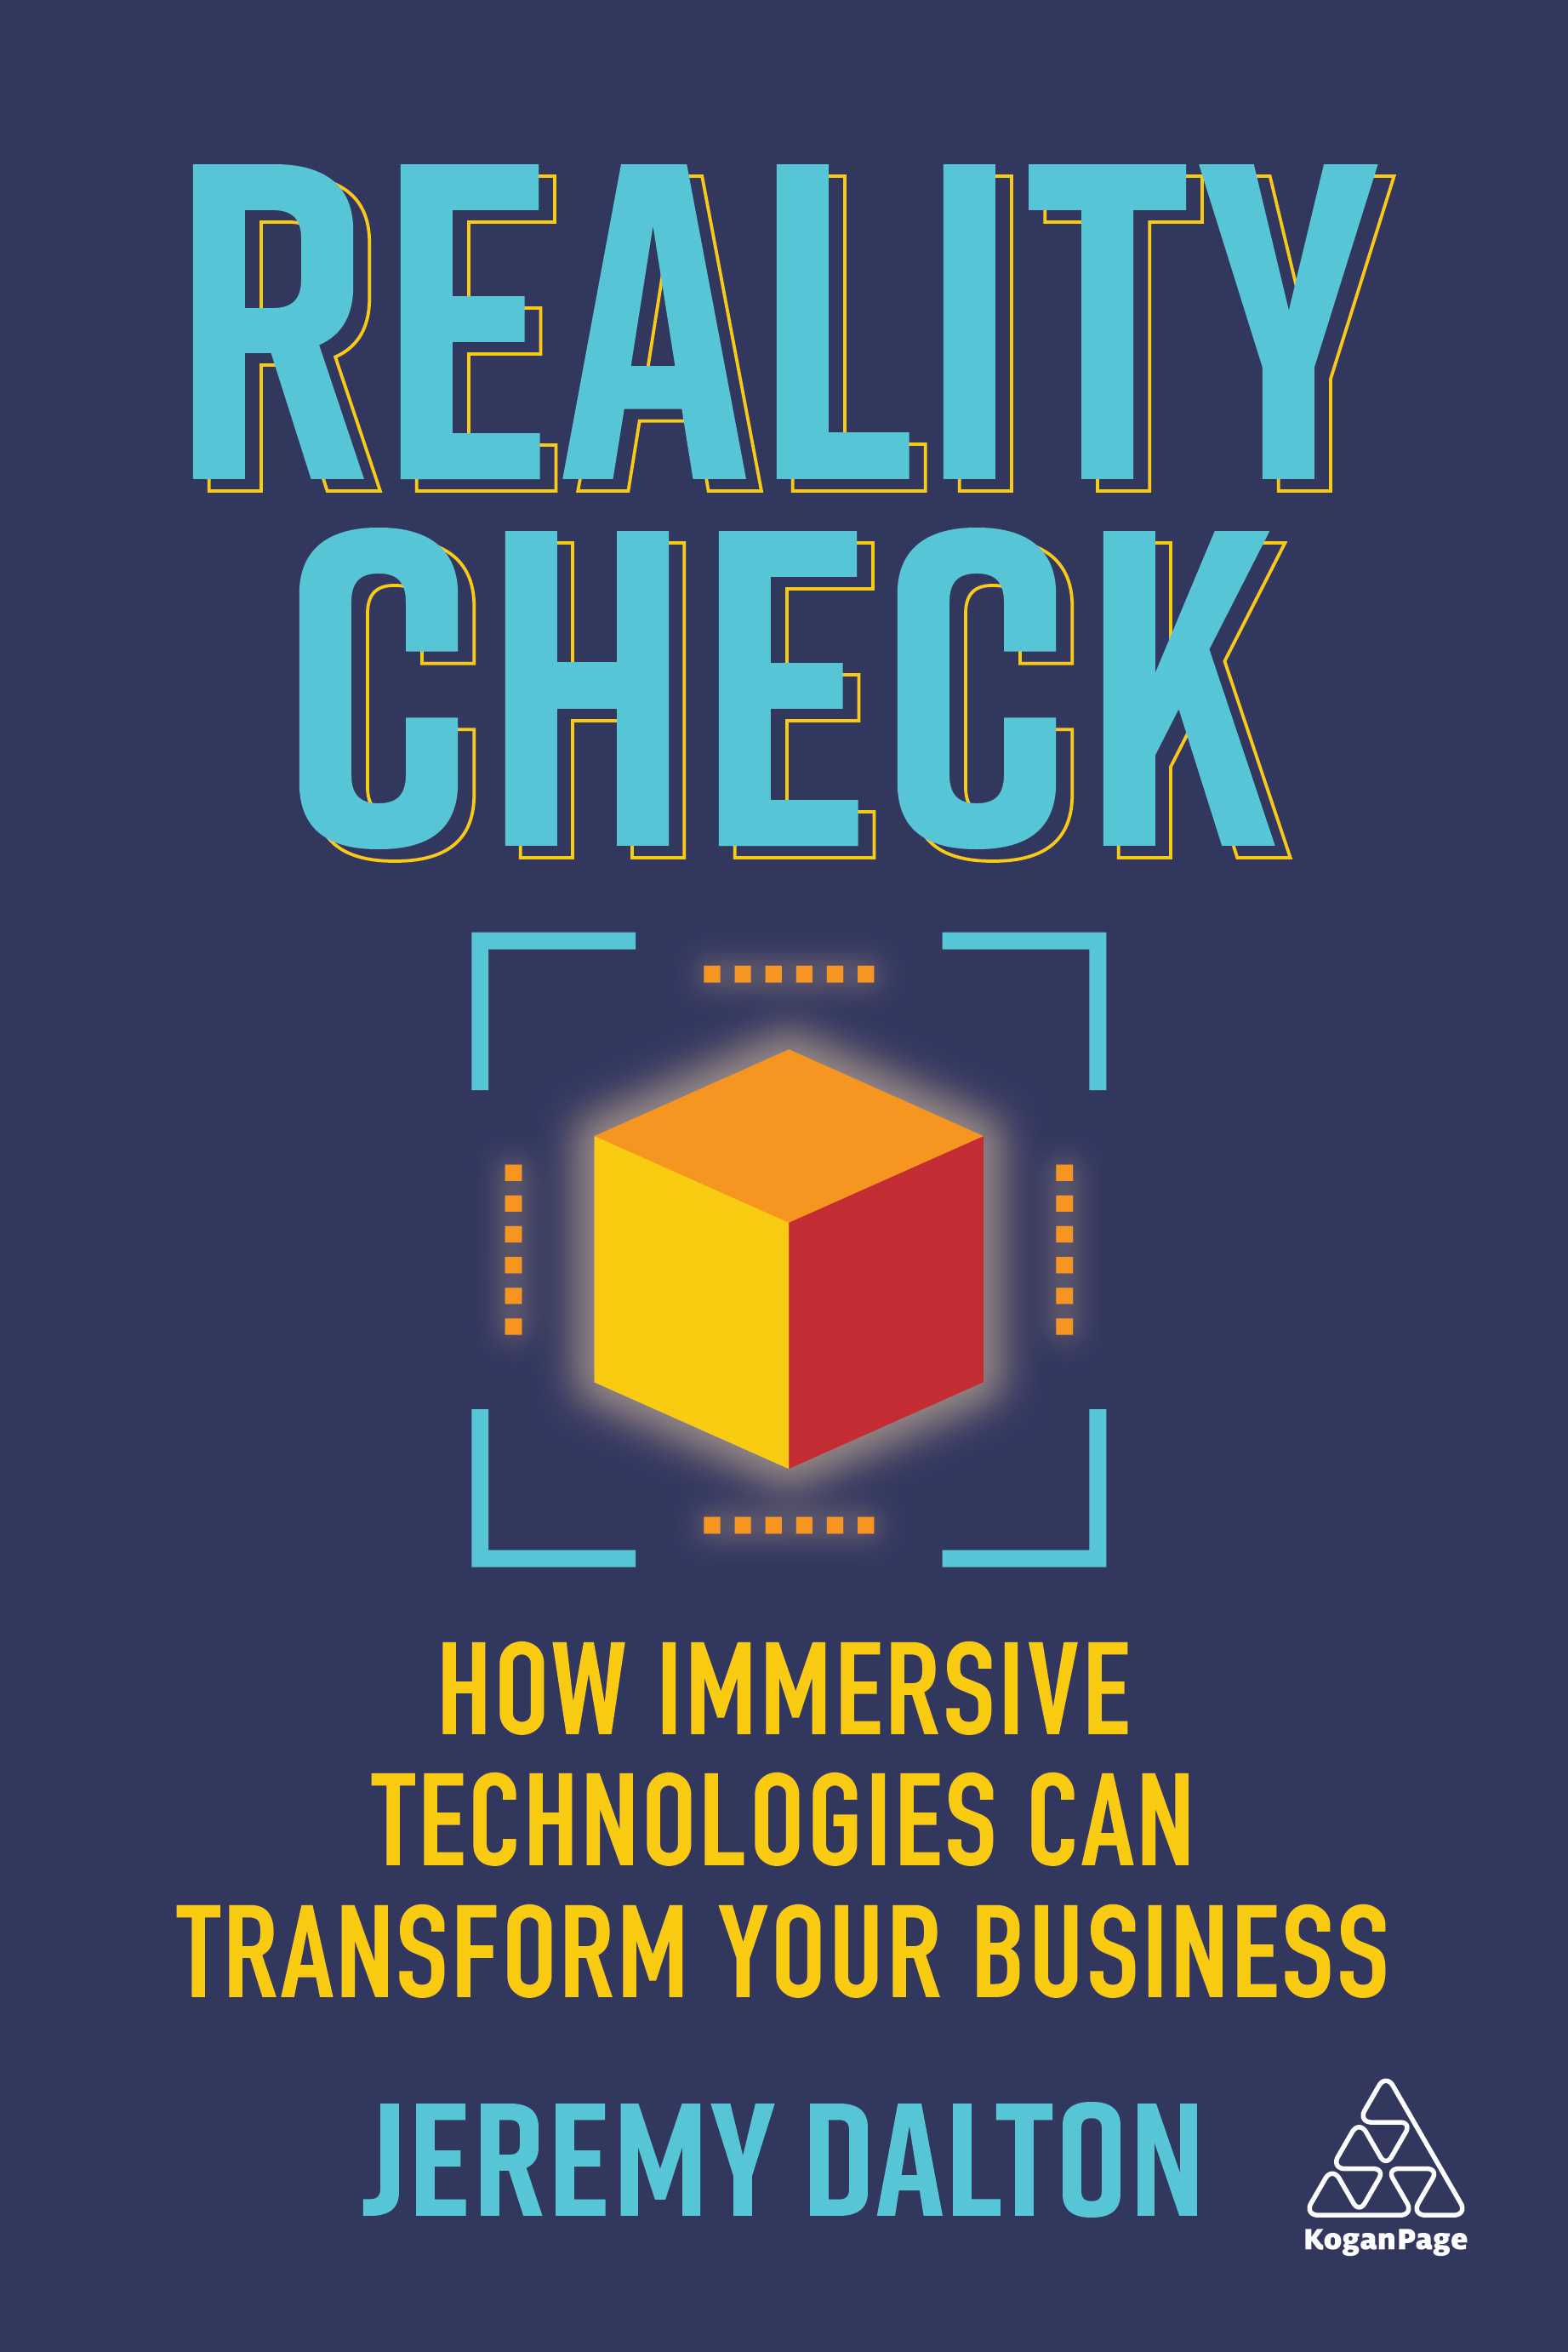 The cover of the book, Reality Check, by Jeremy Dalton